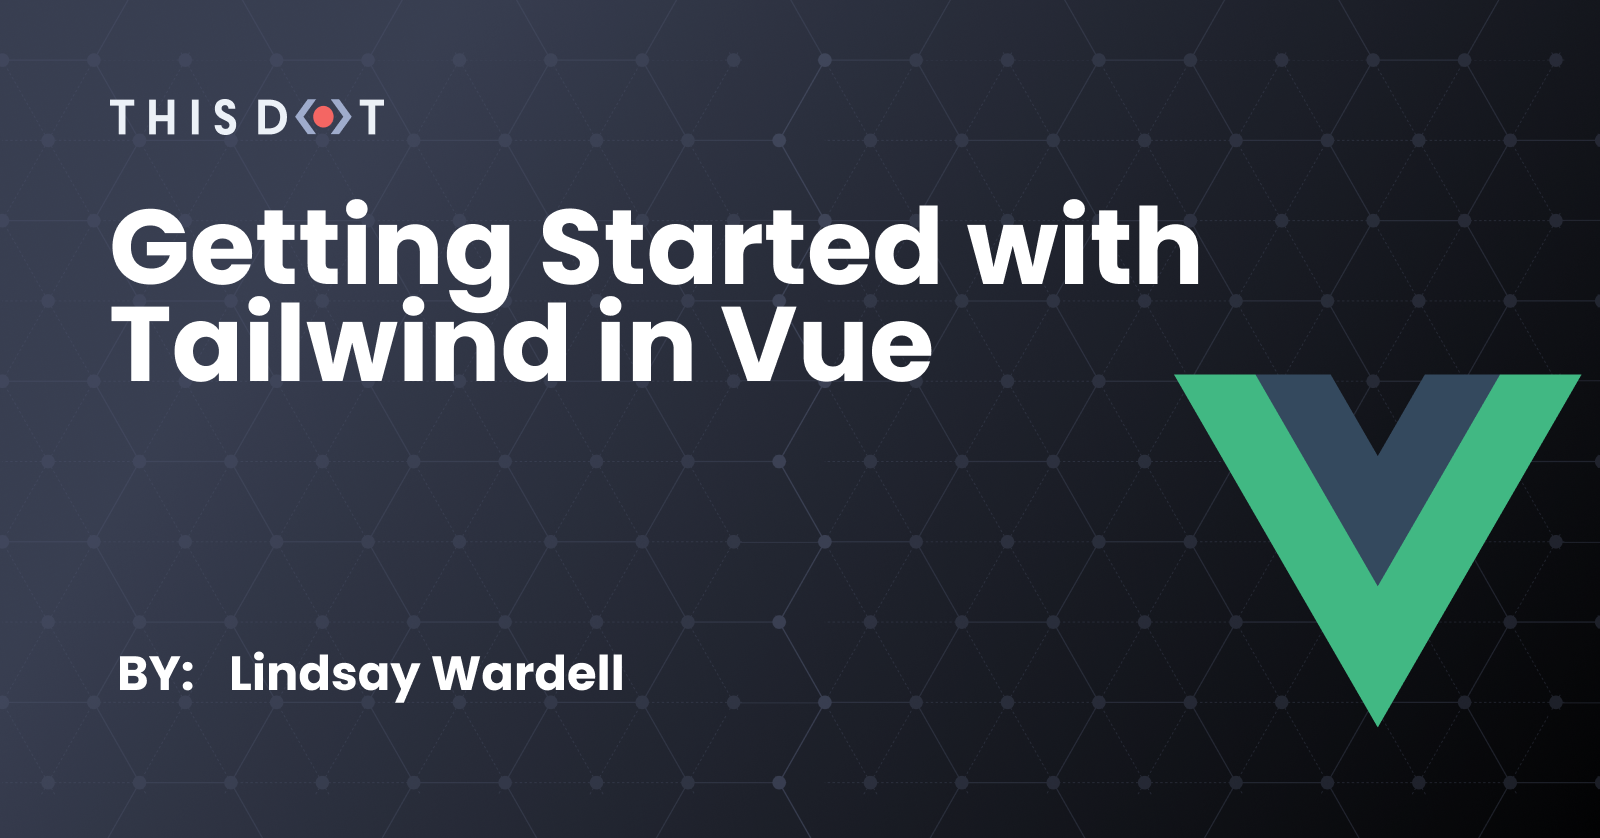 Getting Started with Tailwind in Vue